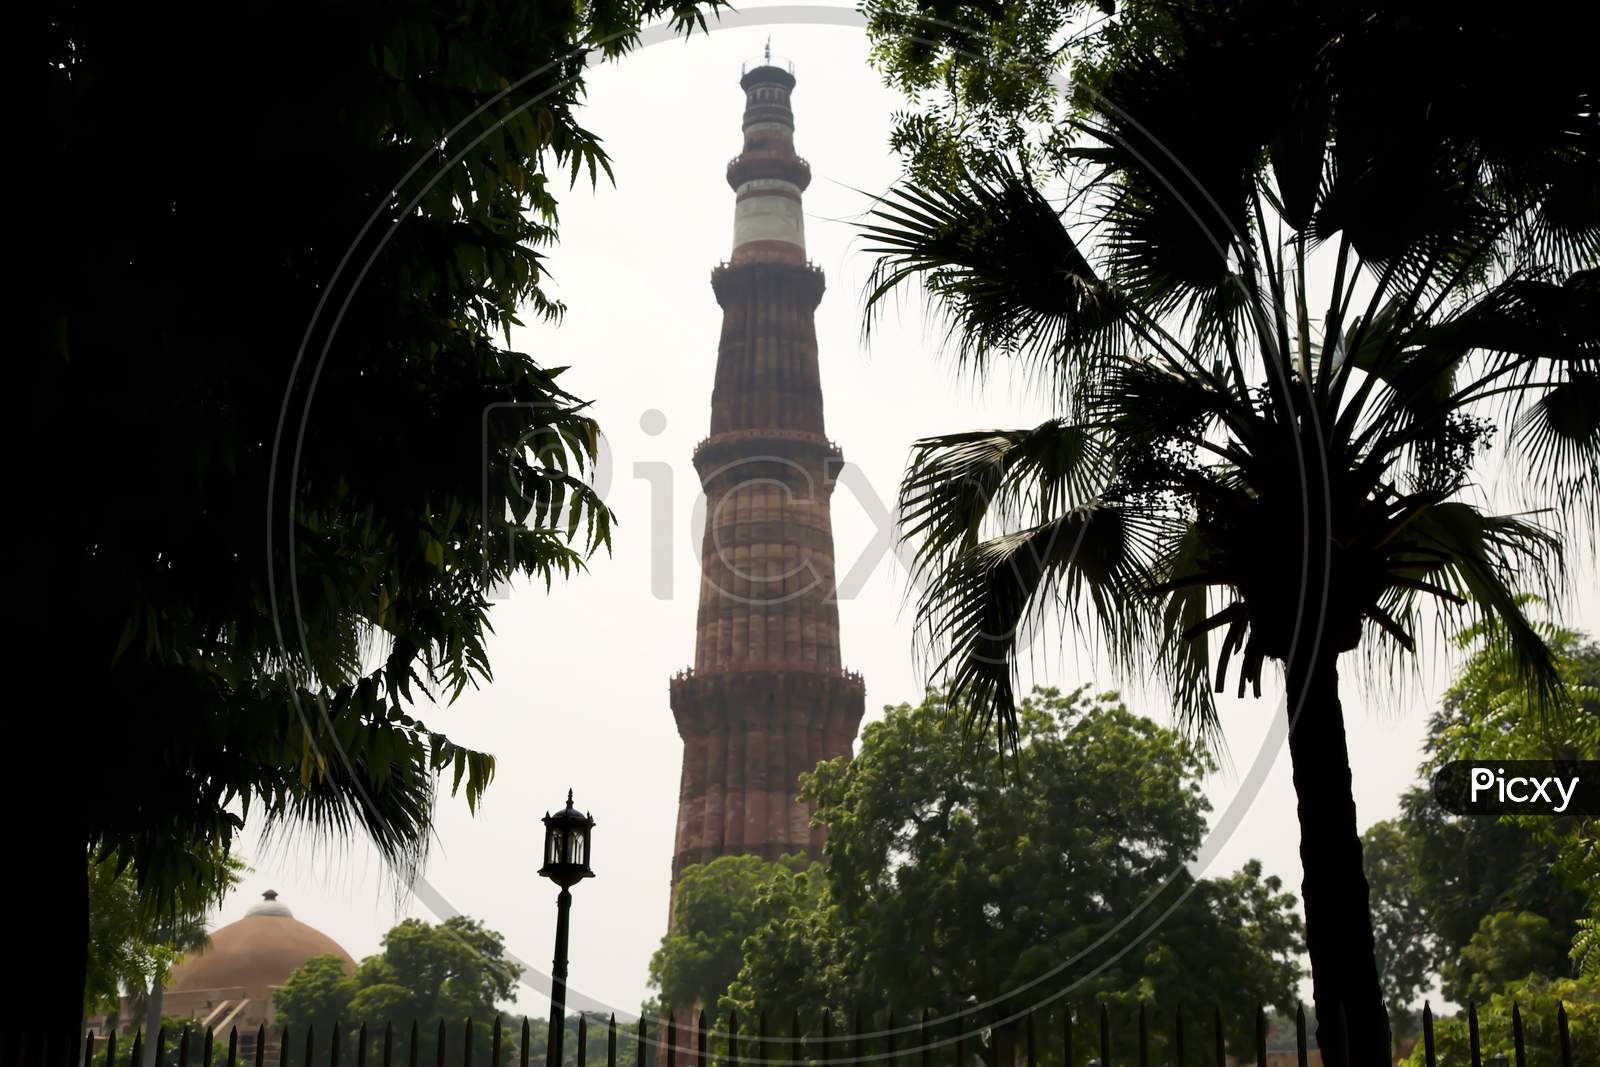 A View Of The Minar Through The Trees, The Combination Of Man Made And Natural Makes A Beautiful Place In India